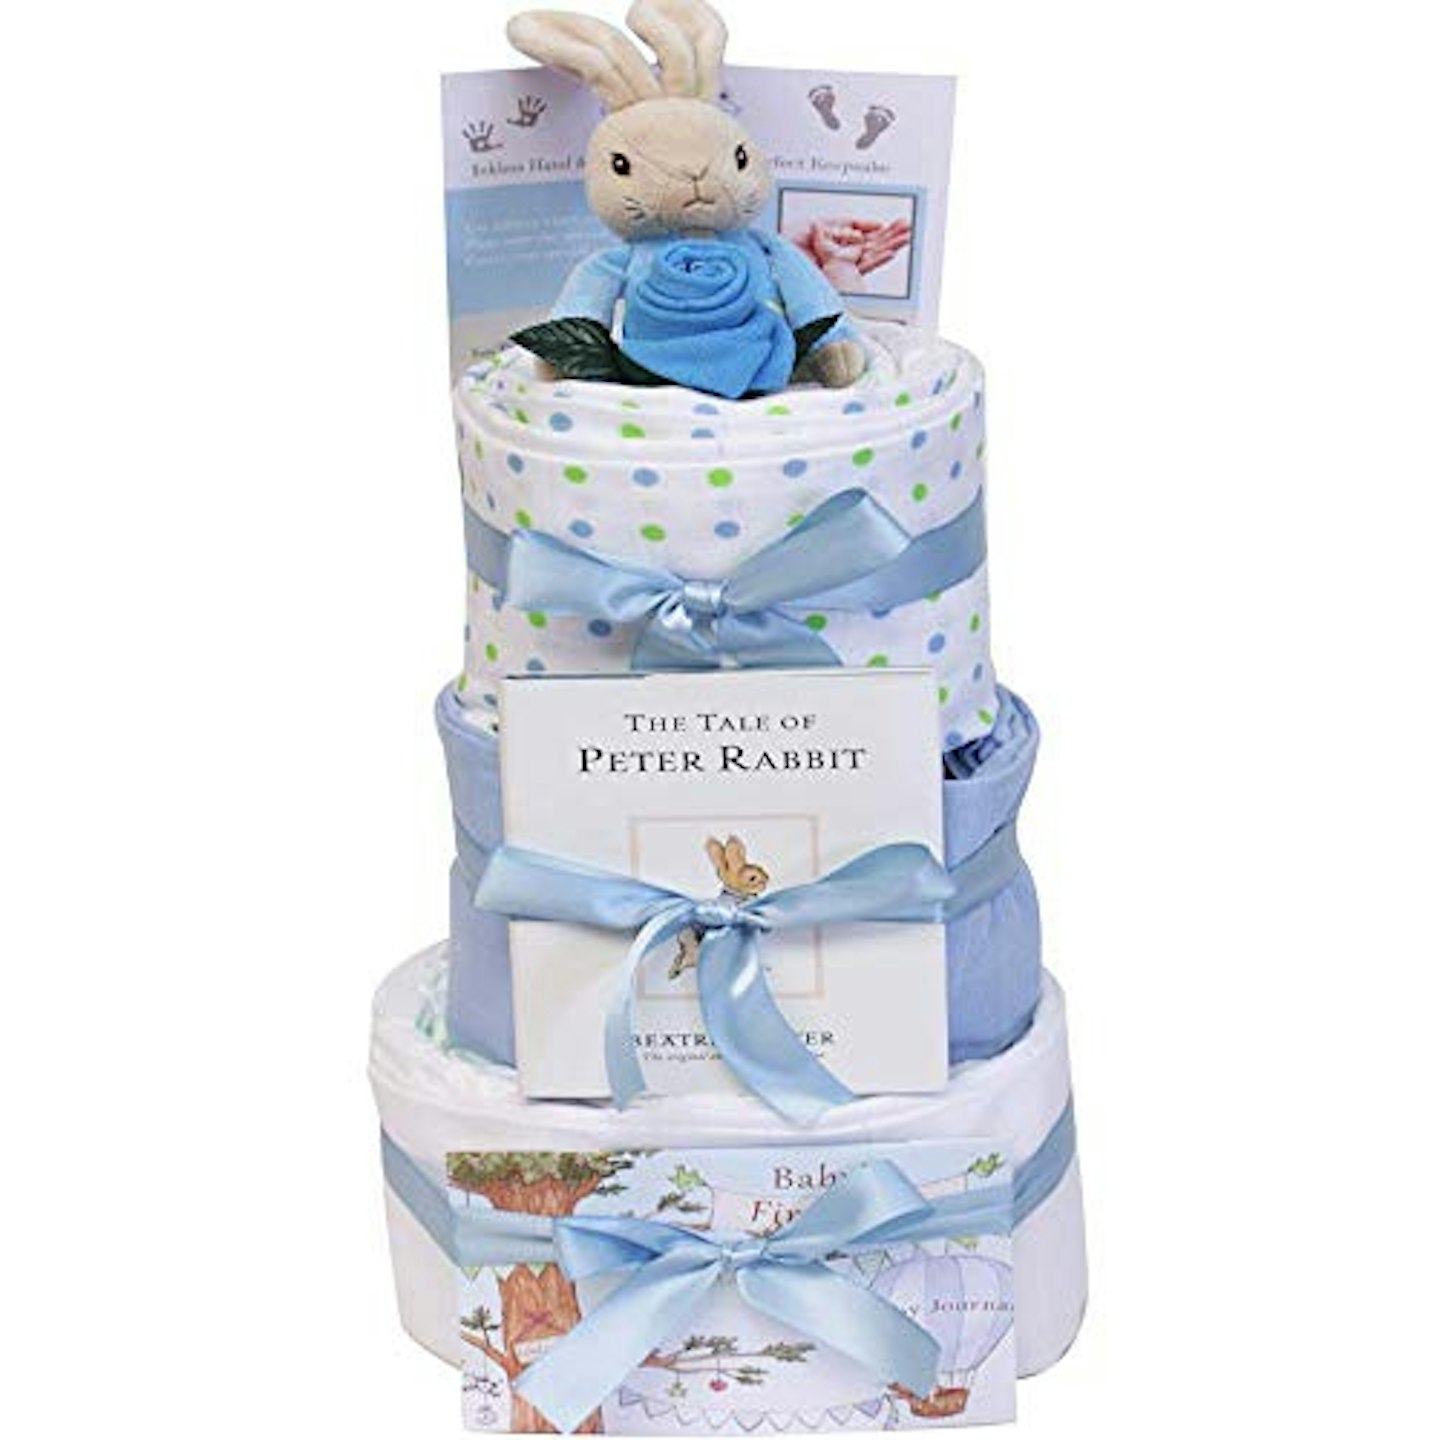 3 Tier Nappy Cake - Baby shower gift